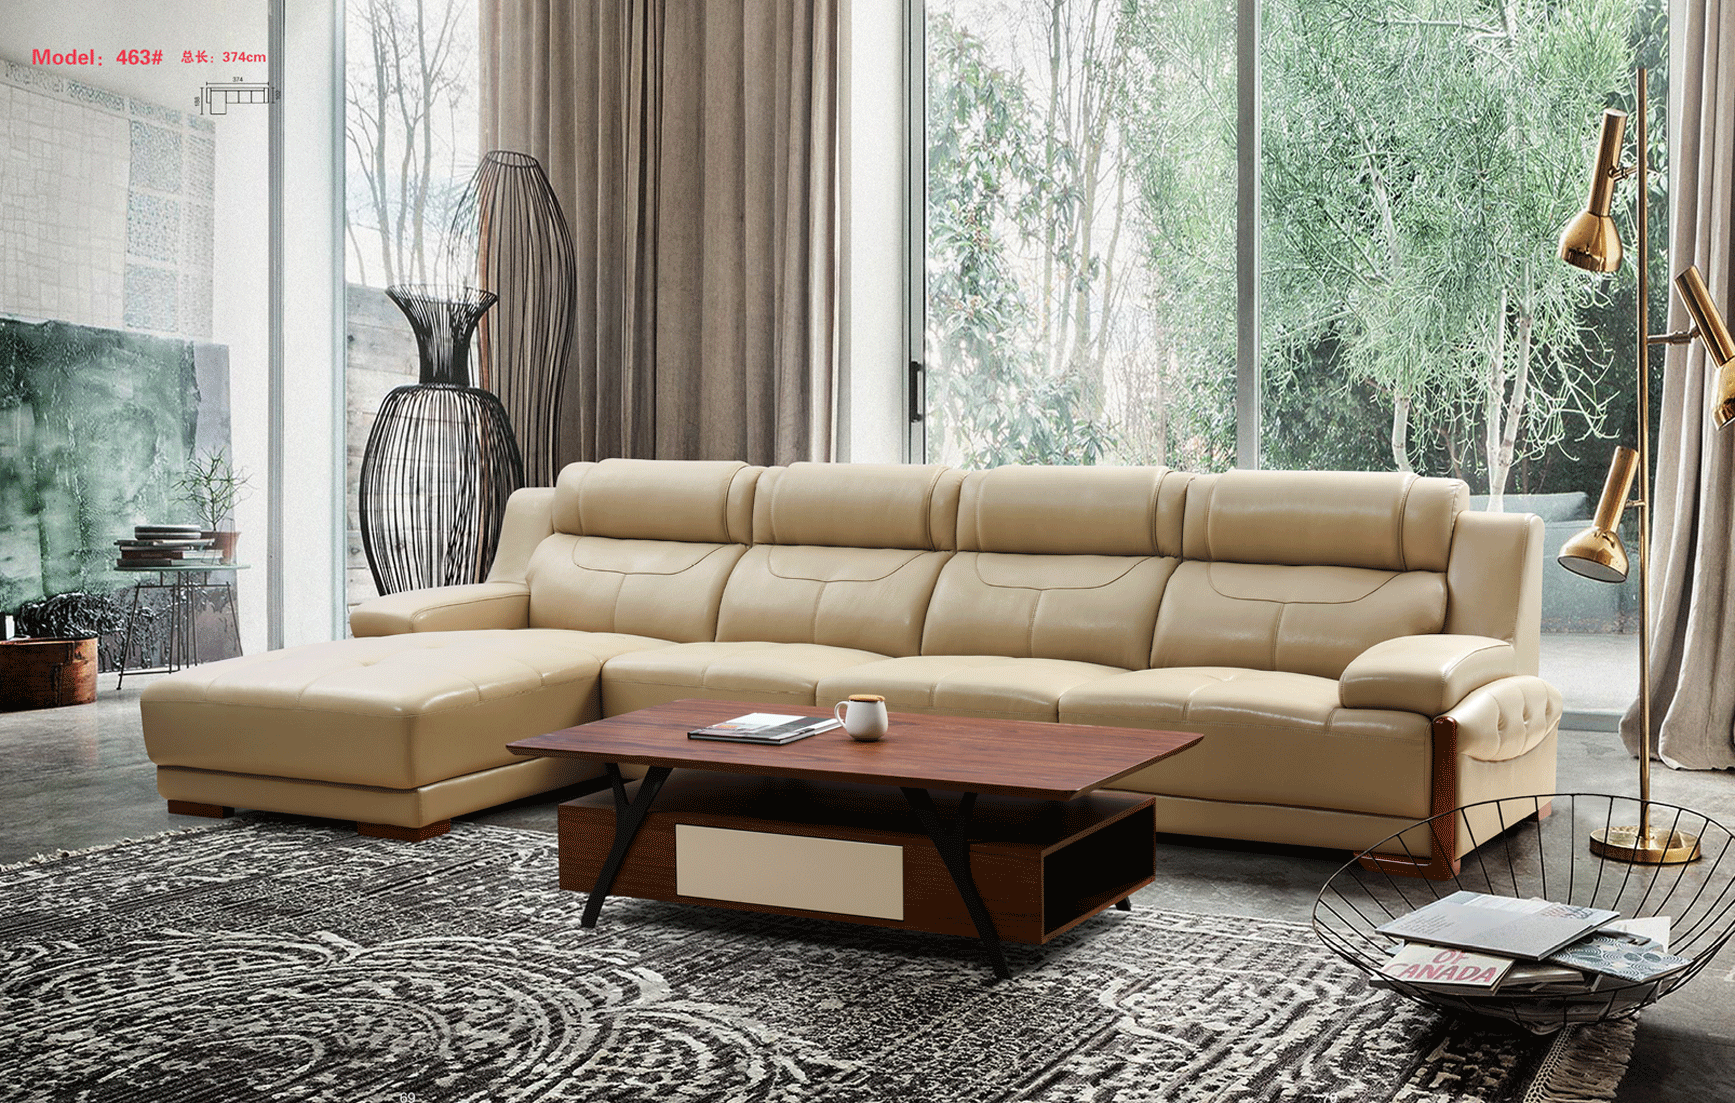 Brands ALF Capri Coffee Tables, Italy 463 Sectional